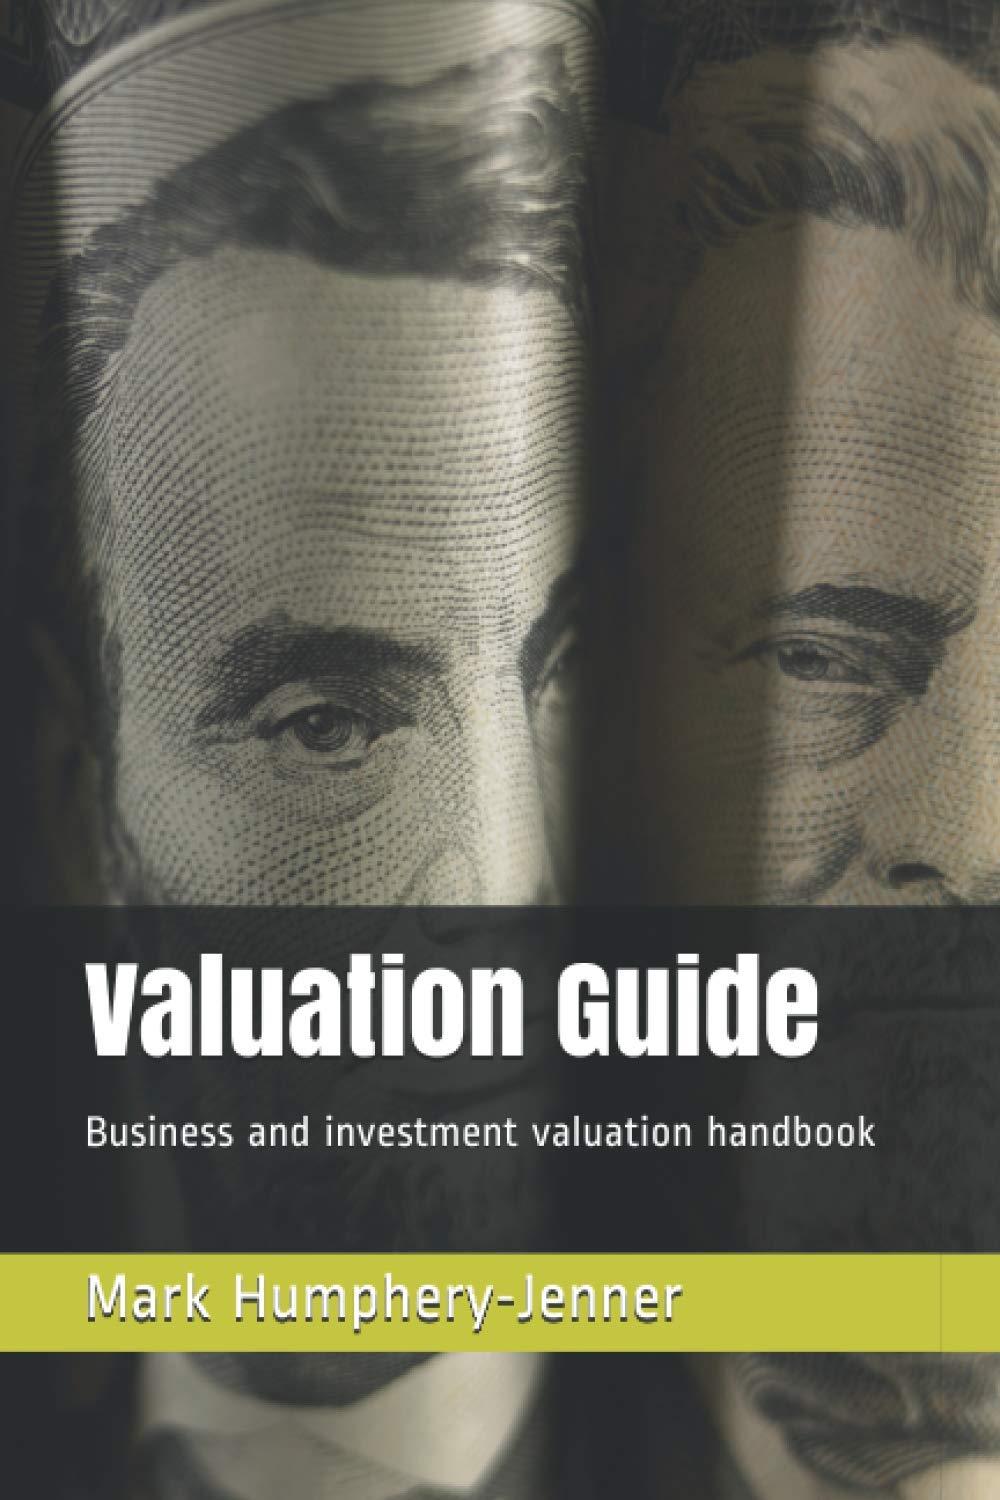 valuation guide business and investment valuation handbook 1st edition mark humphery-jenner b0924m9lpd,